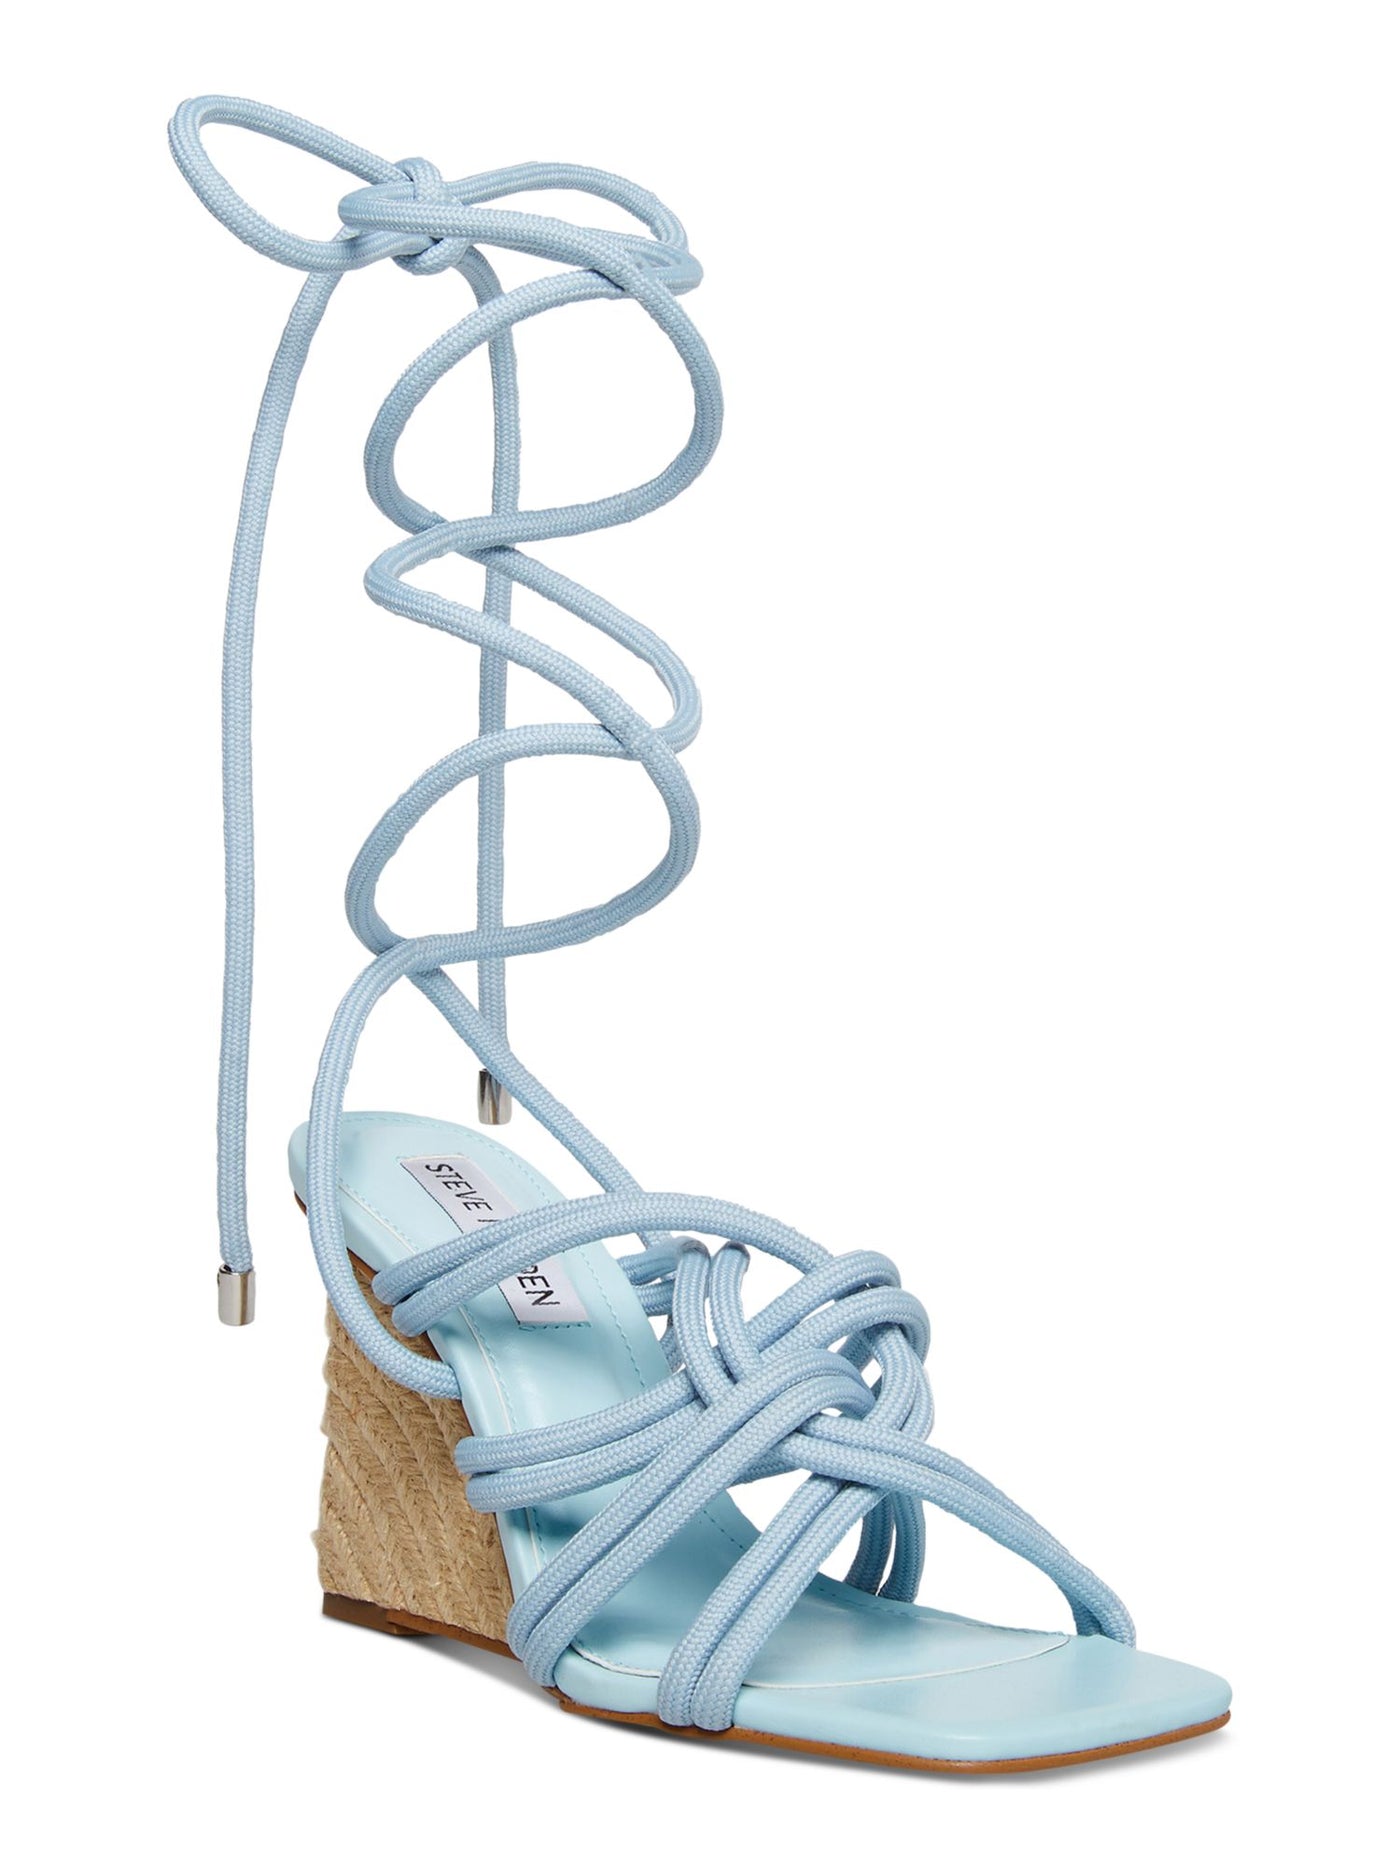 STEVE MADDEN Womens Light Blue Padded Strappy Idolized Square Toe Wedge Lace-Up Dress Espadrille Shoes 7 M